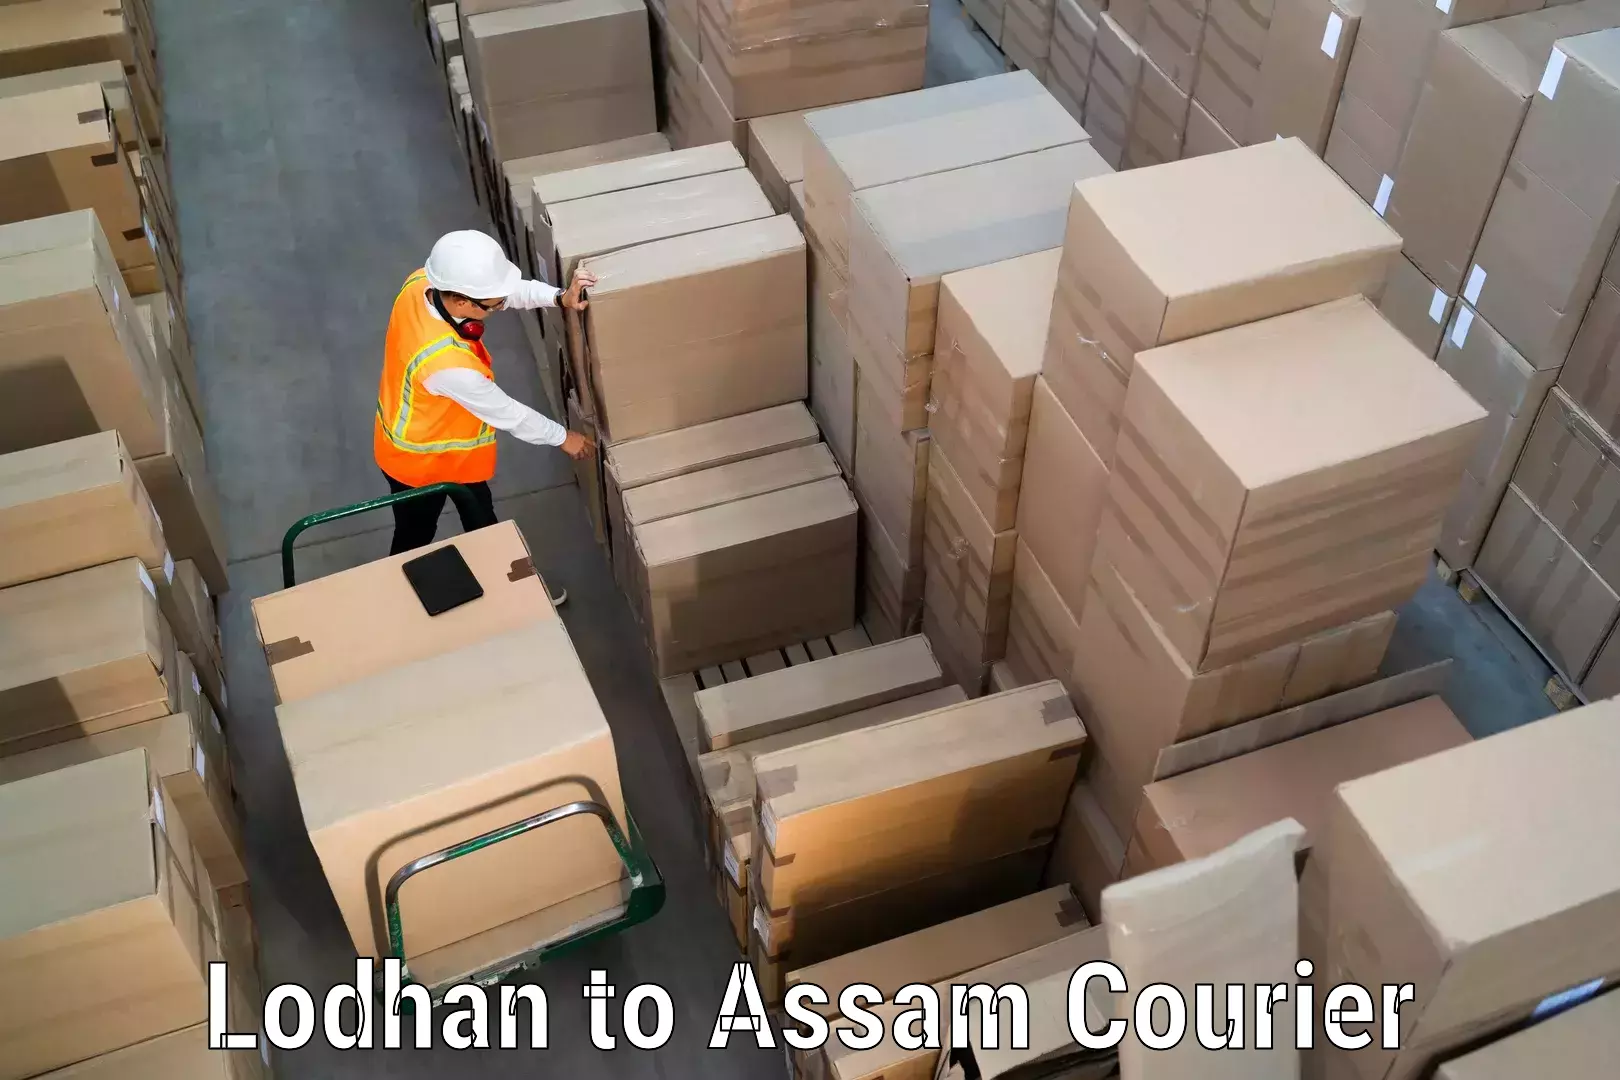 On-demand courier Lodhan to Assam